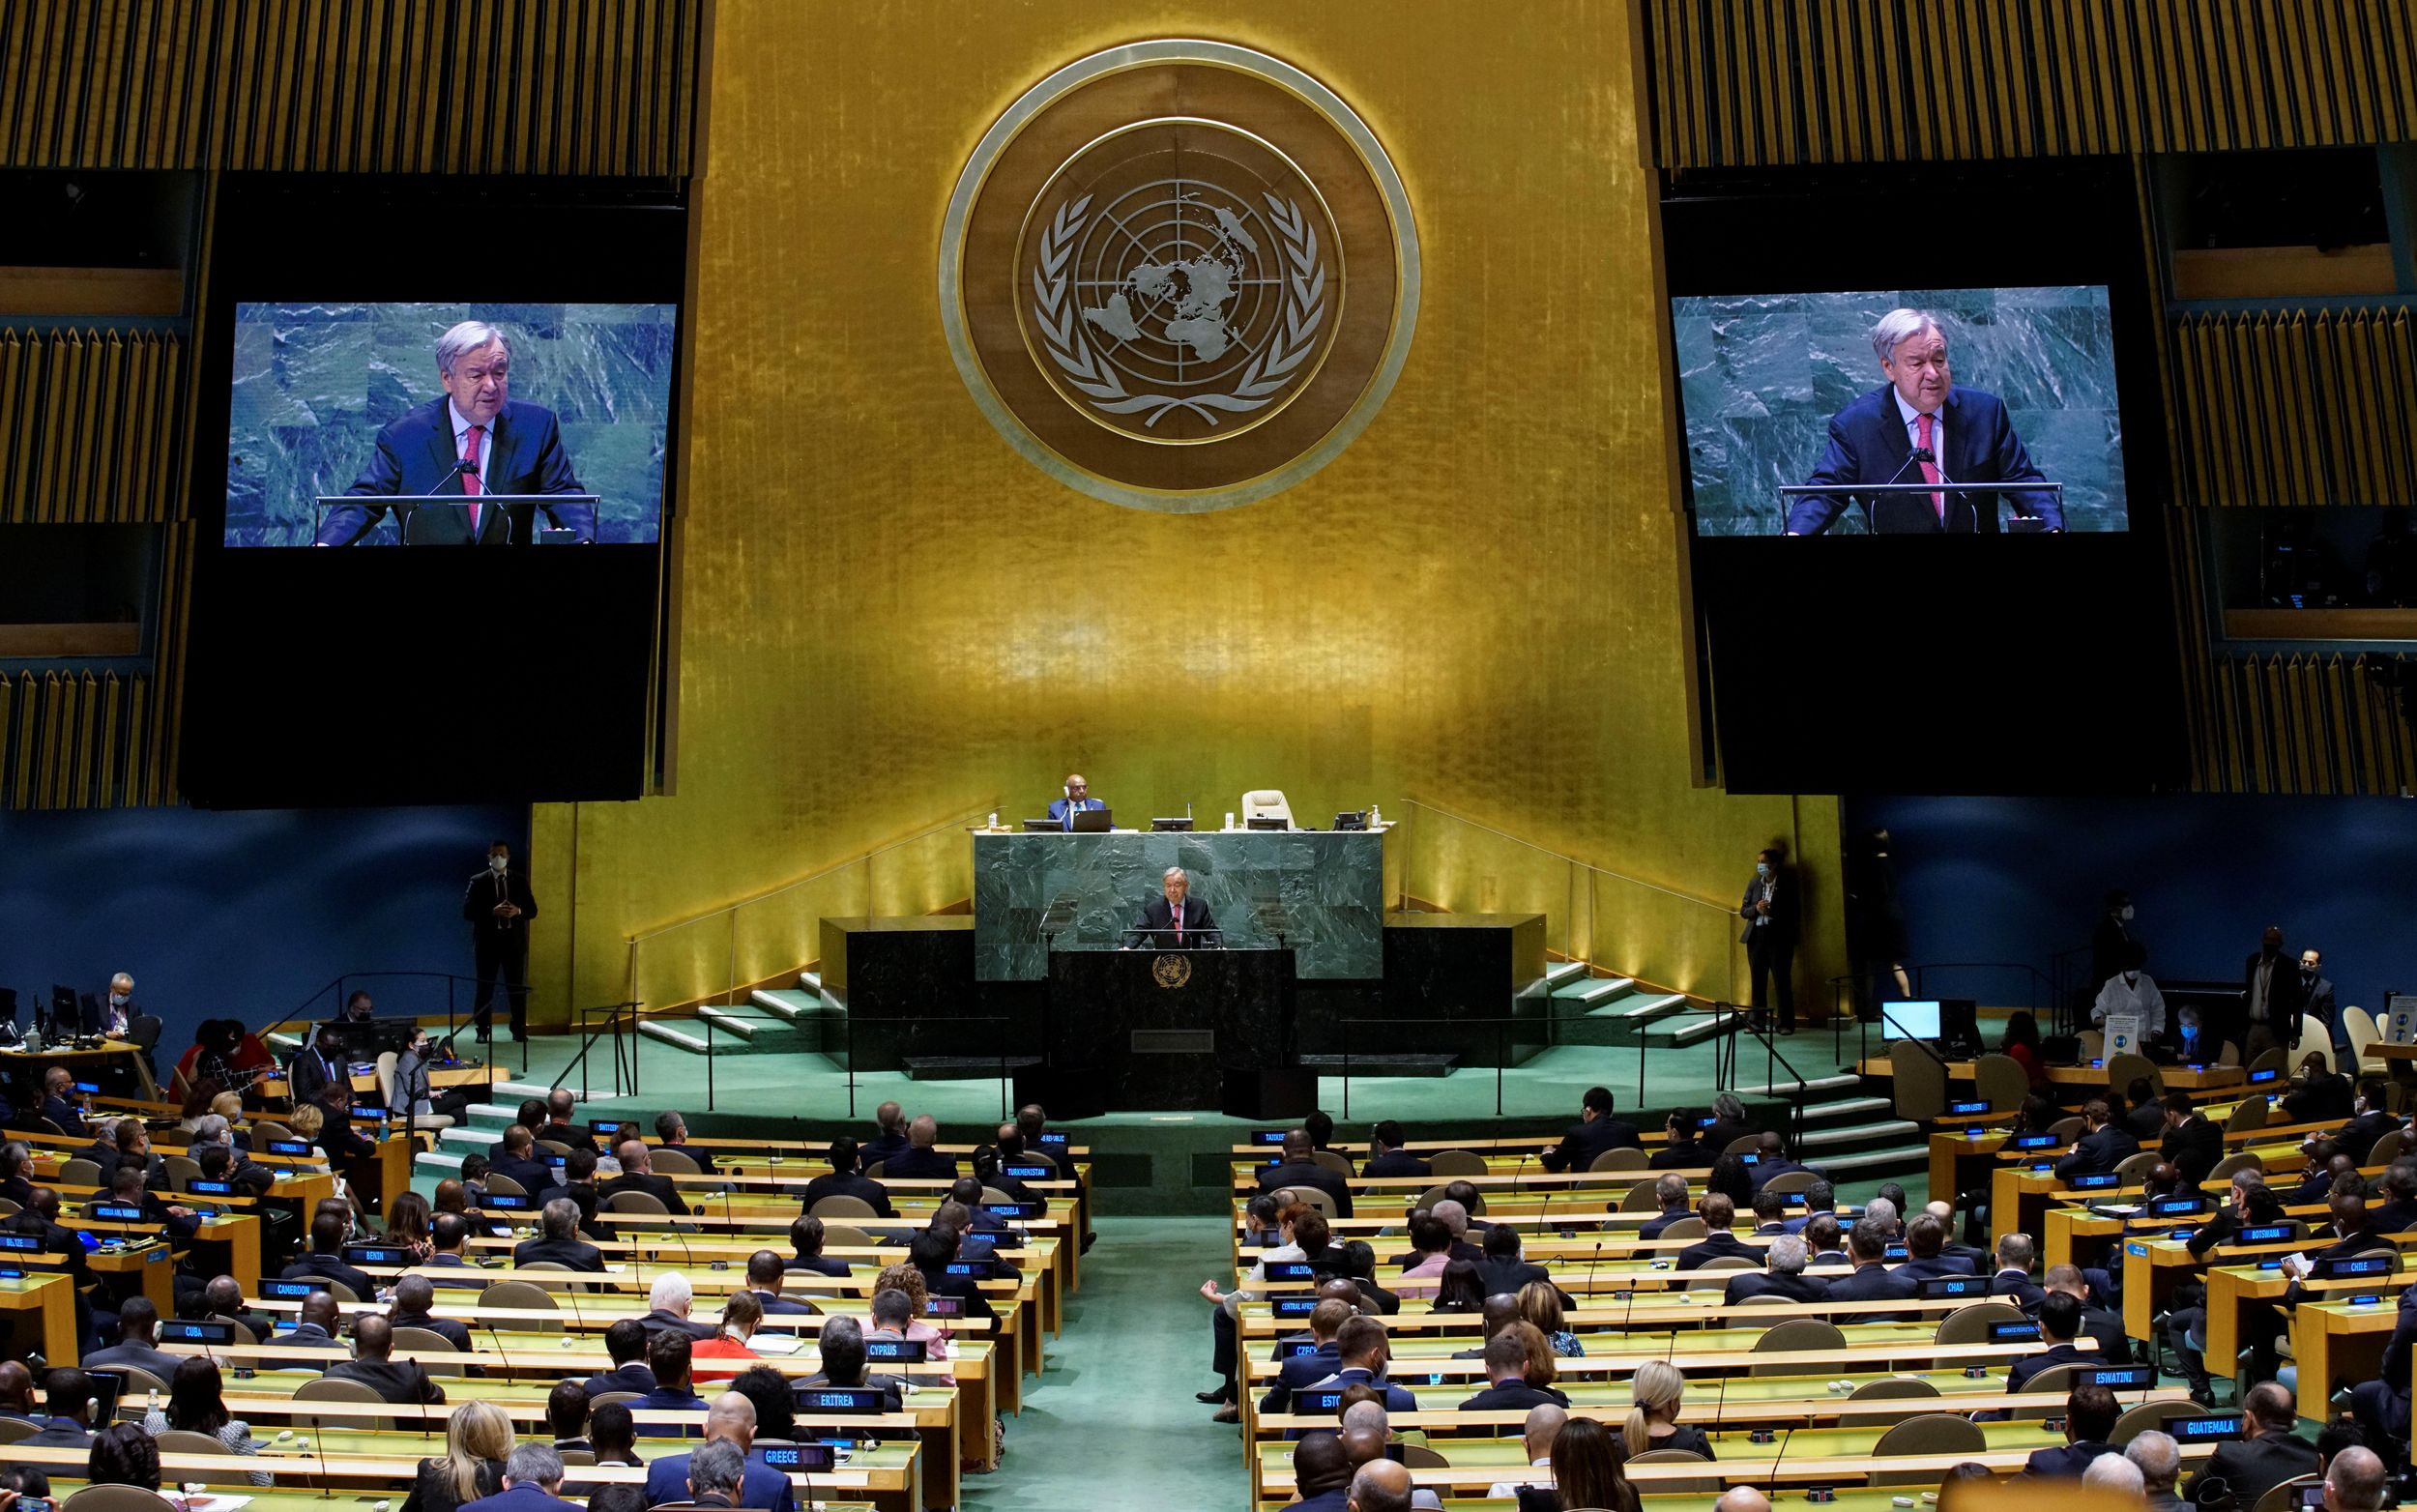 United Nations Secretary-General Antonio Guterres addresses the 76th Session of the U.N. General Assembly in New York City, U.S., September 21, 2021